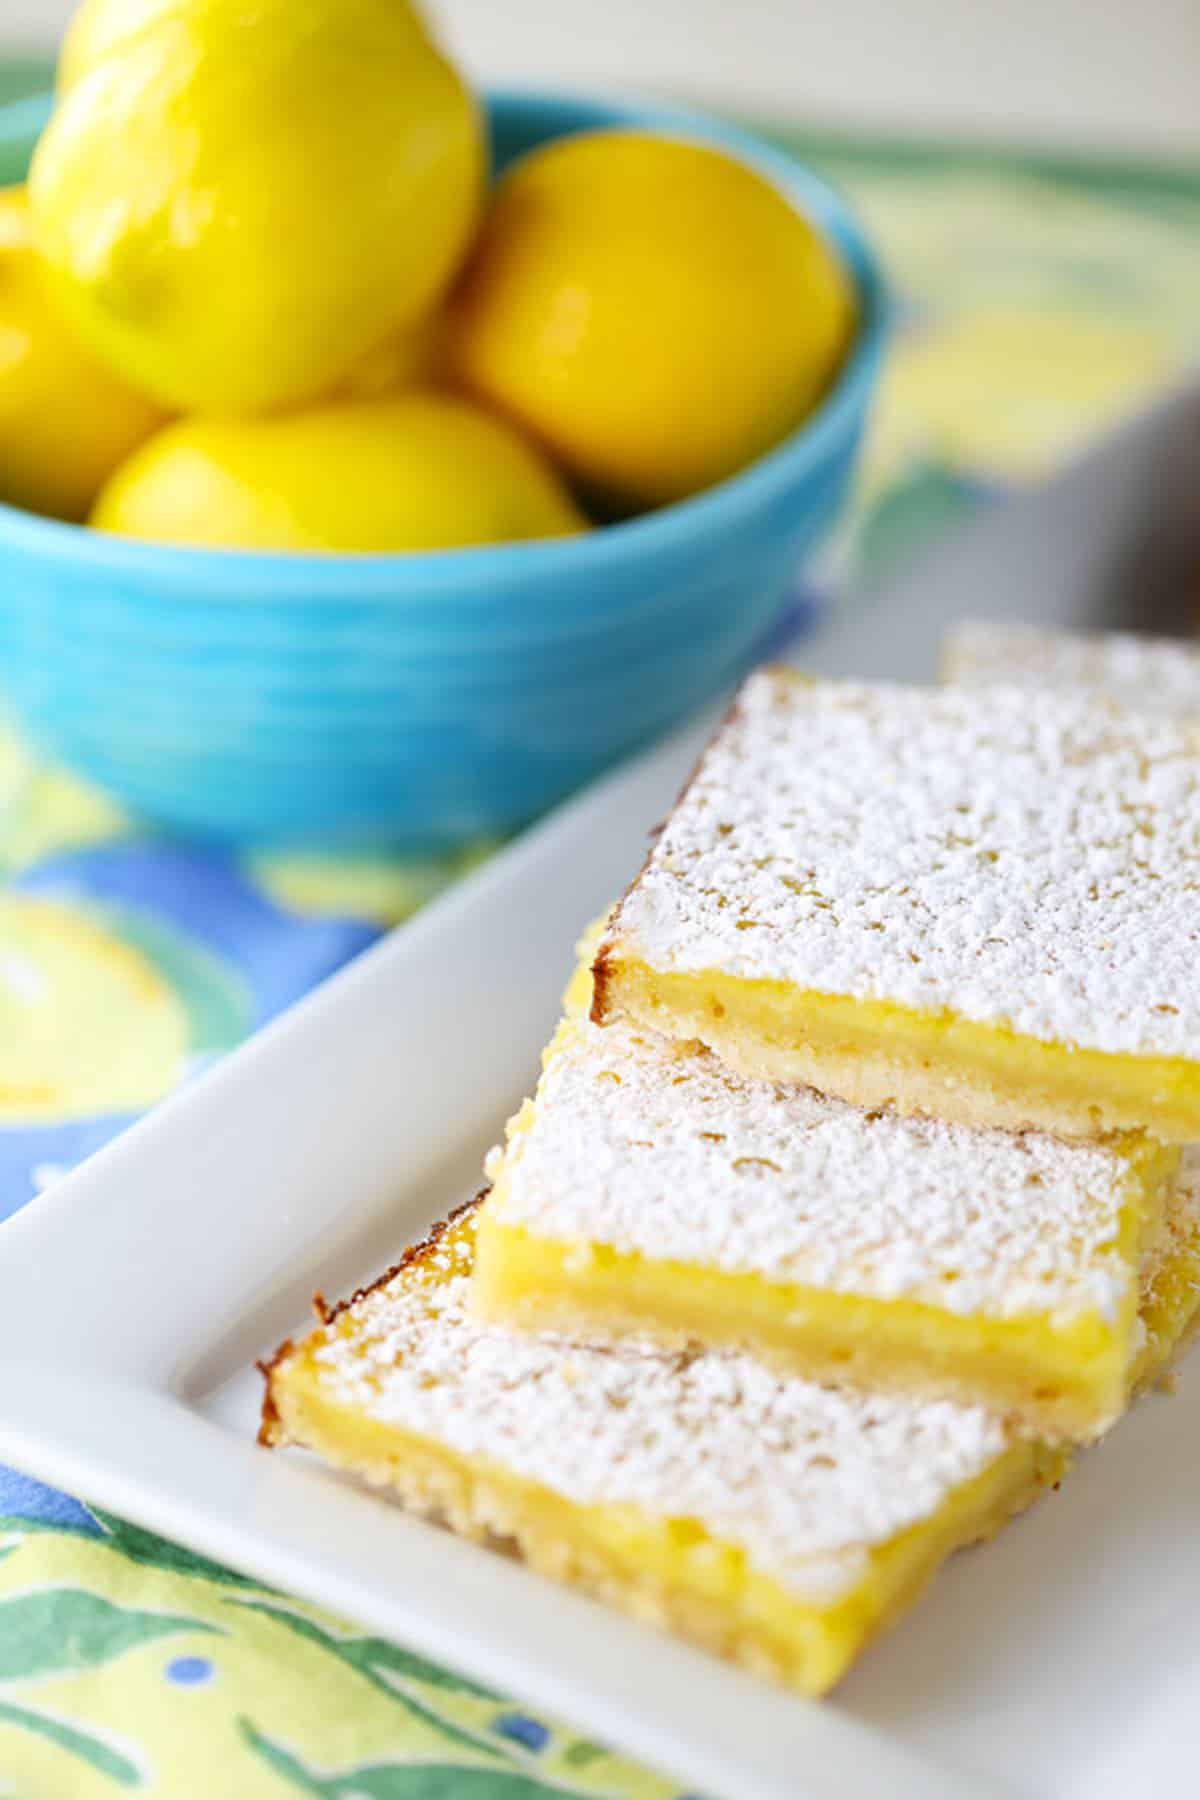 A stack of 3 lemon bars on a square white plate, with a blue bowl of lemons in the background.